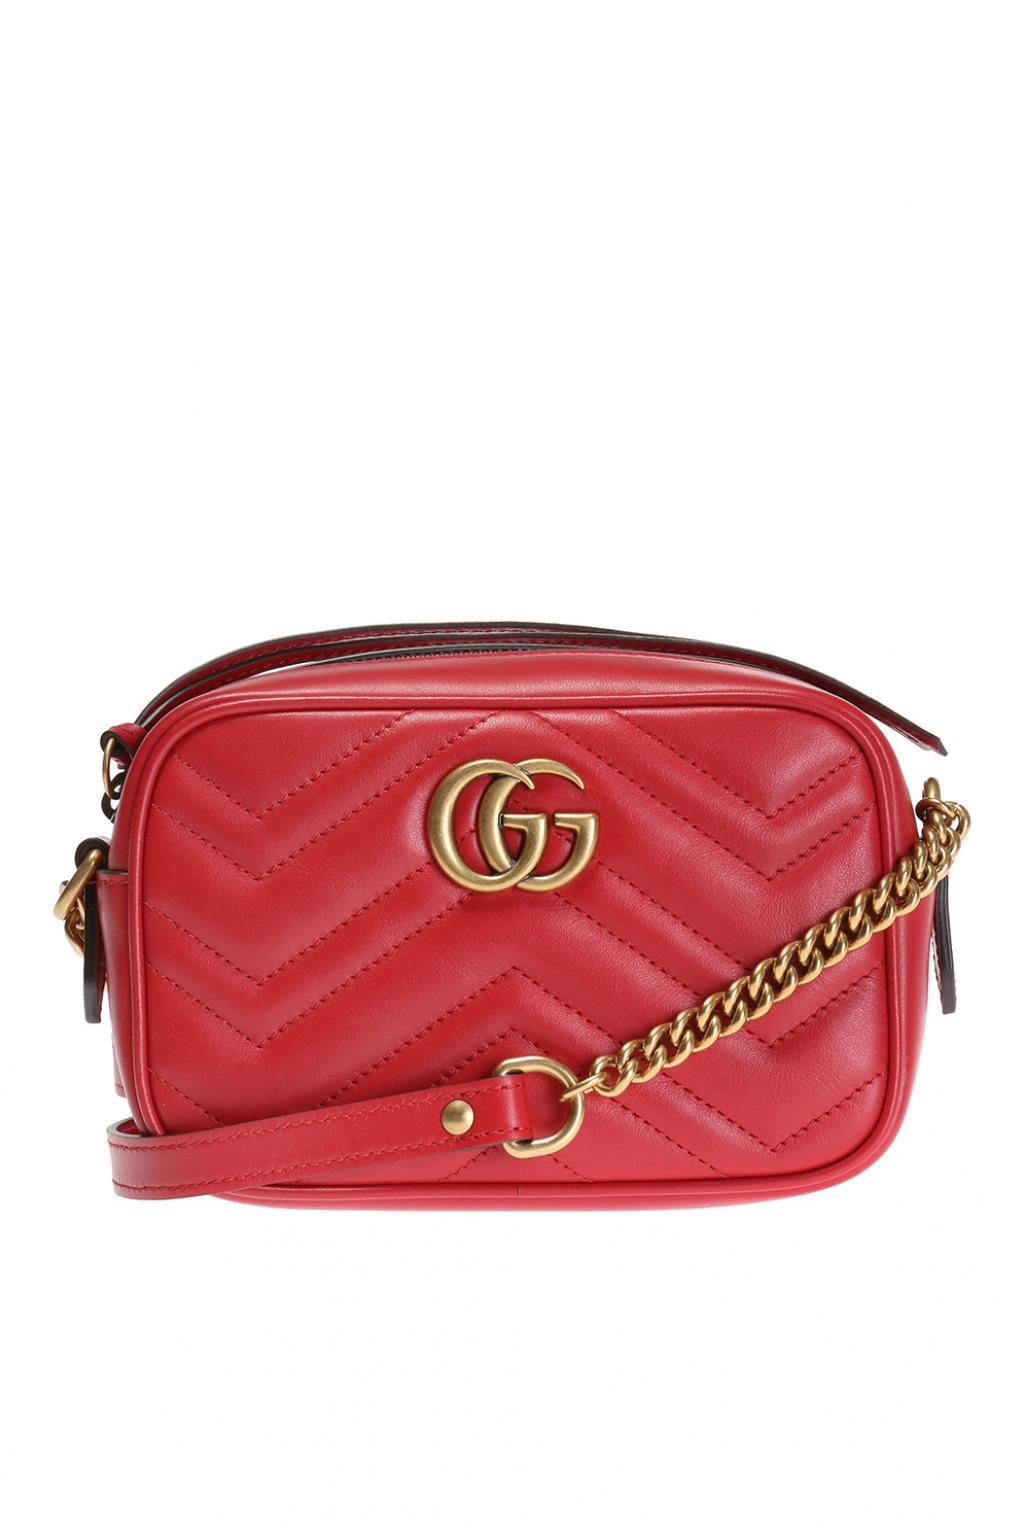 Gucci Leather Mini Bag Marmont Matelassé in Red - Lyst